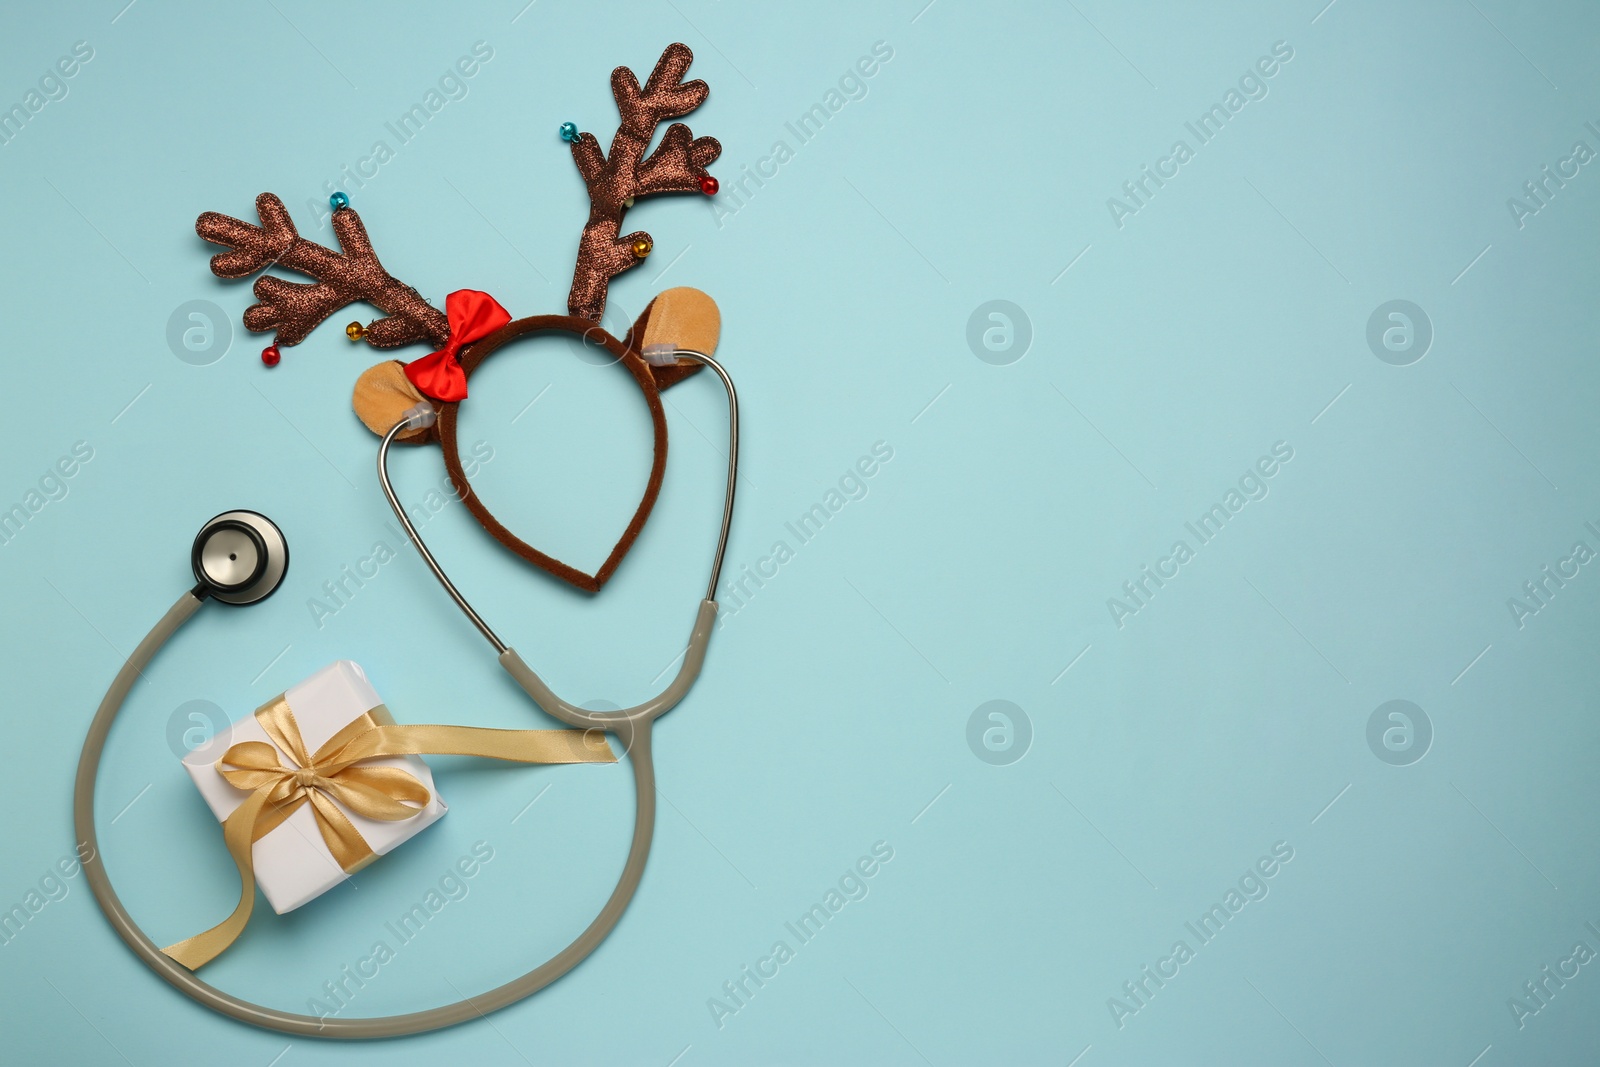 Photo of Greeting card for doctor with stethoscope, gift box and reindeer headband on light blue background, flat lay. Space for text